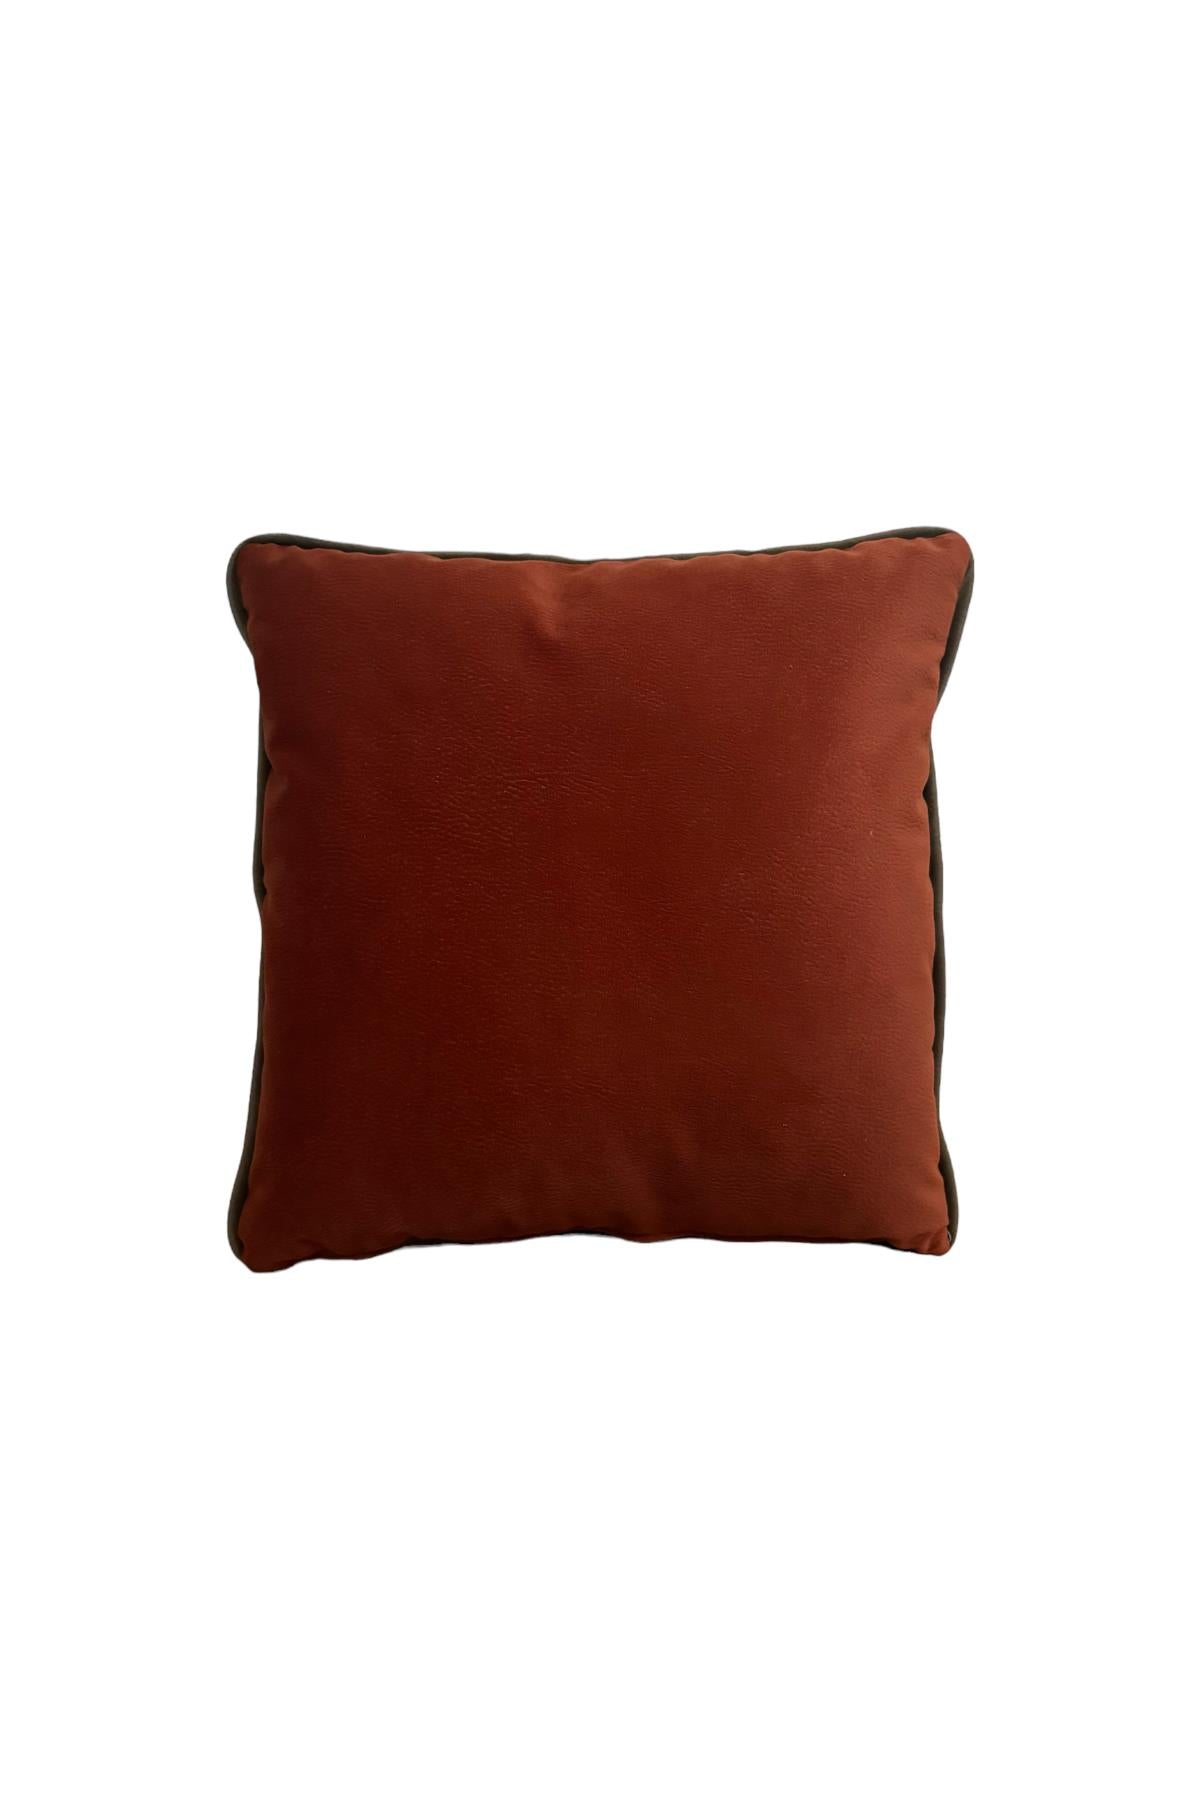 Brown Velvet Throw Pillow with Green Piping